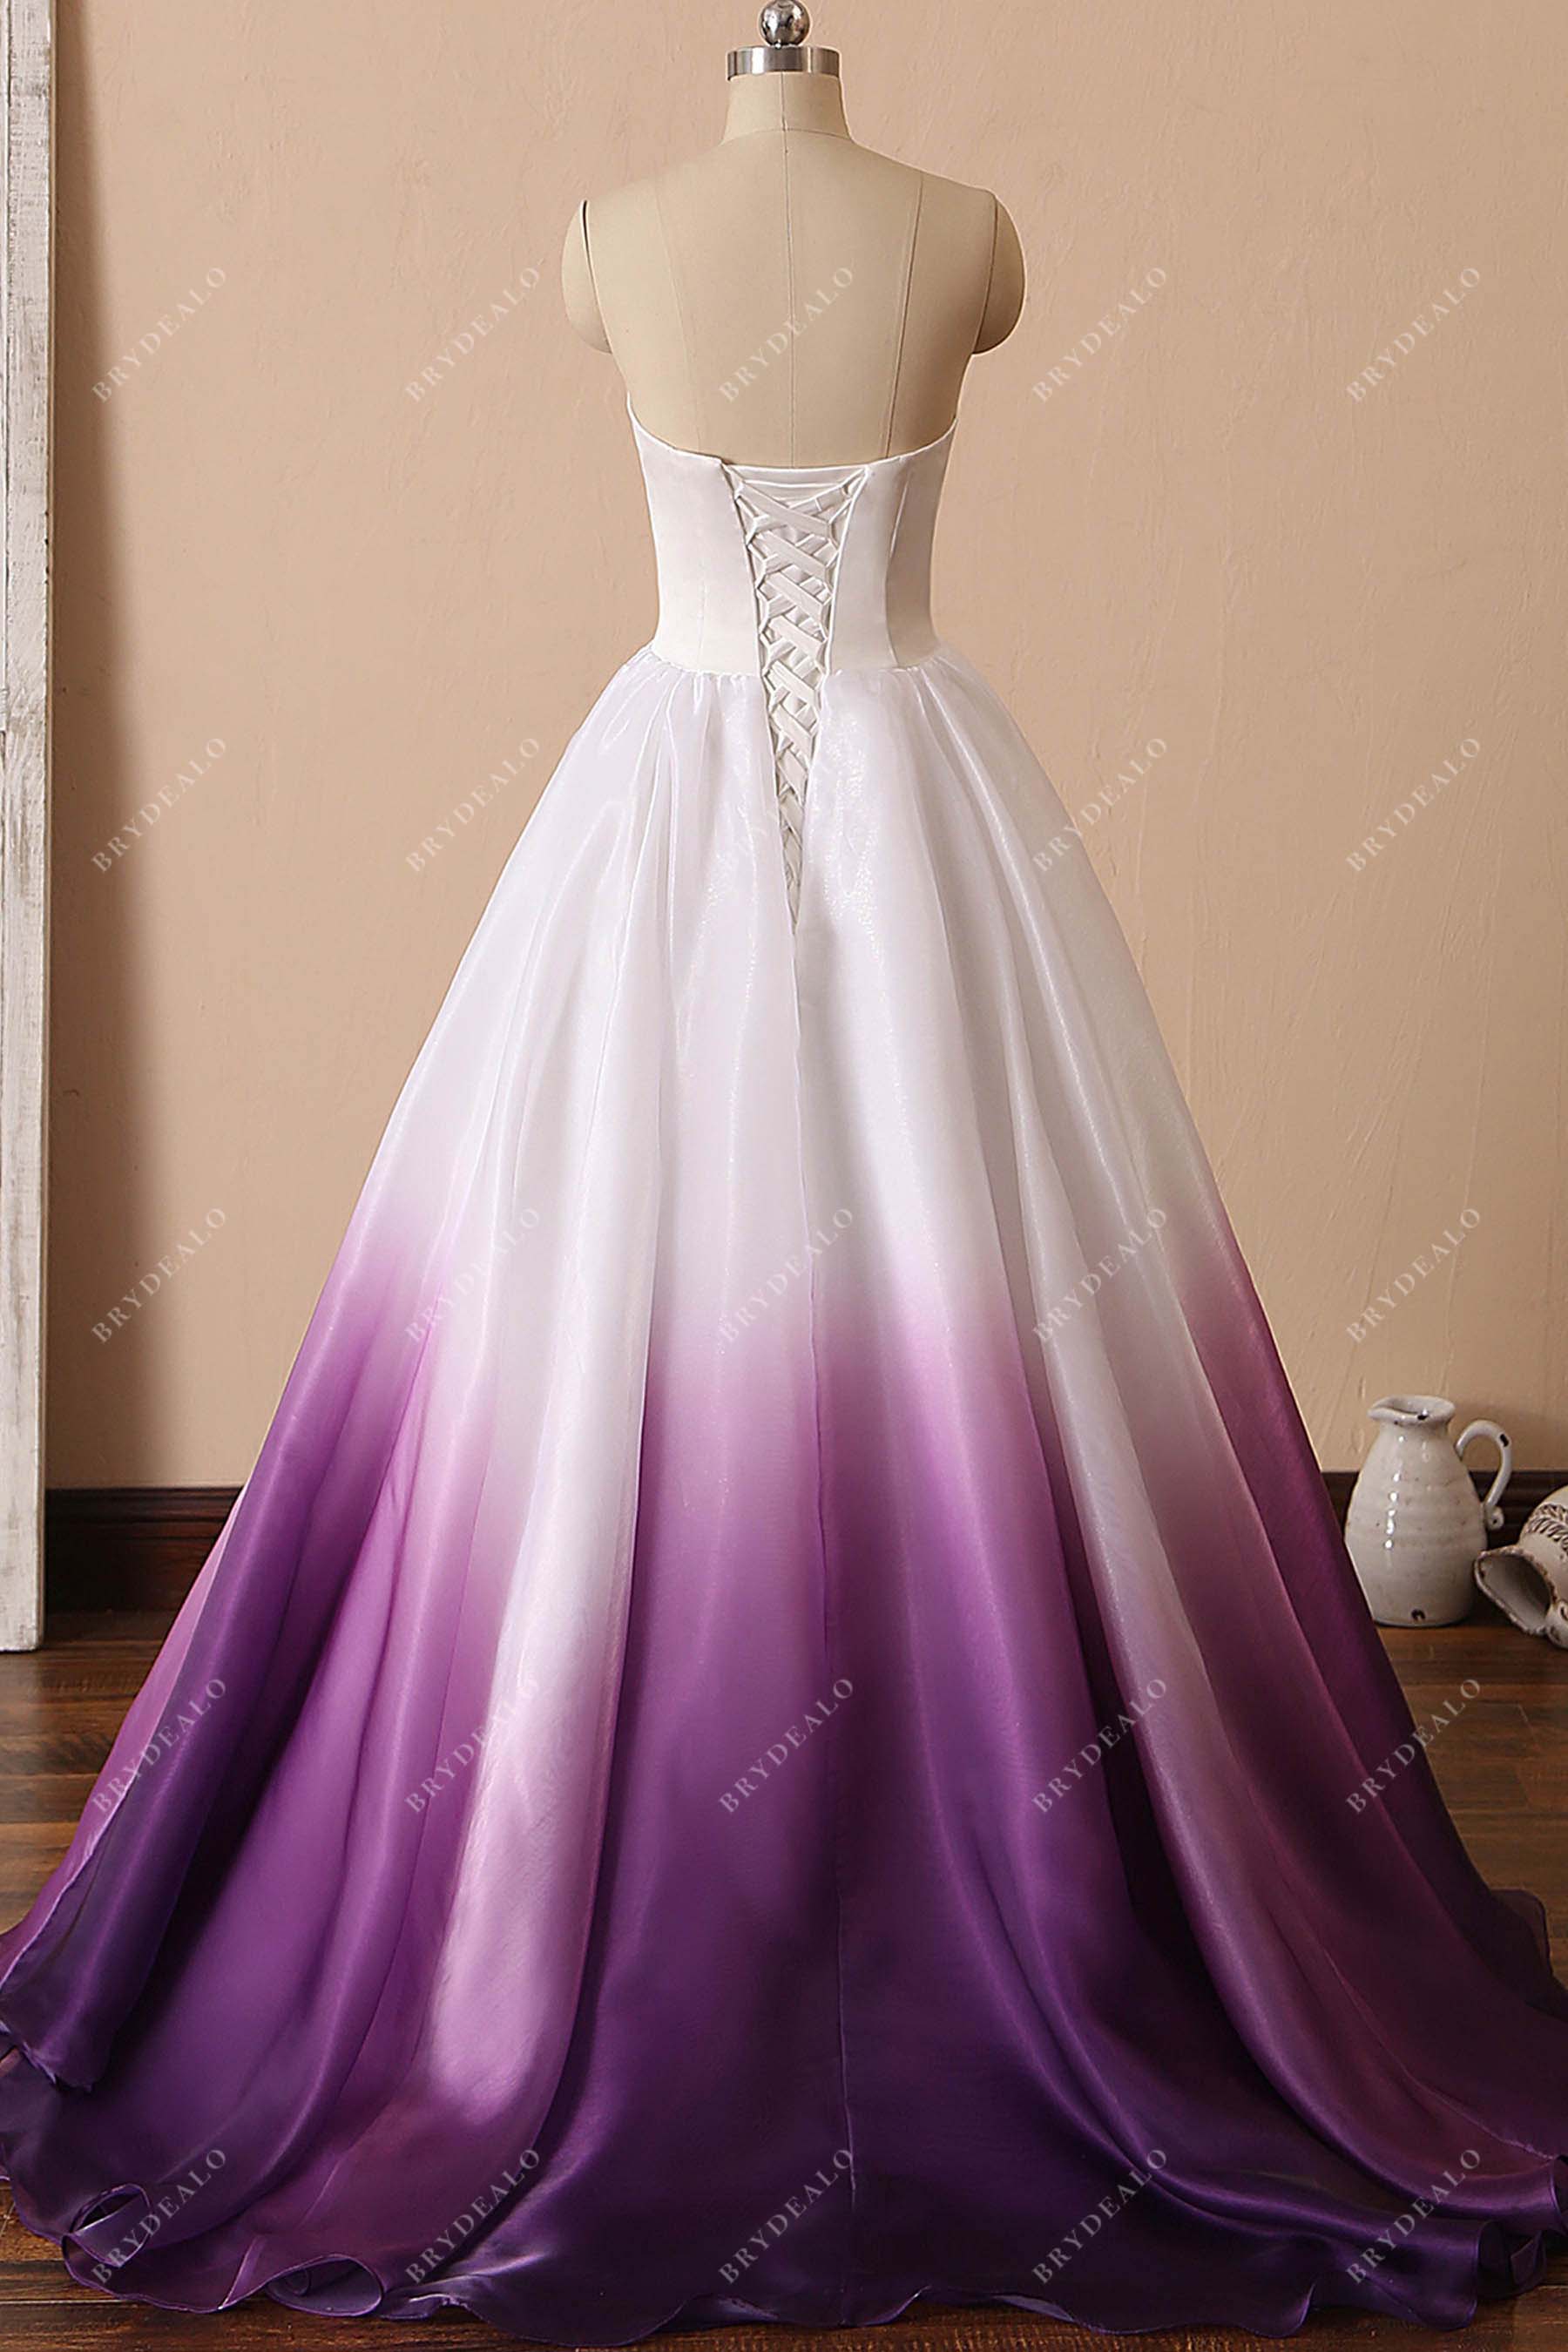 Purple And White Hand-Tailored Tango Dance Dress Costume Dresses For Dances  BD-SG4638